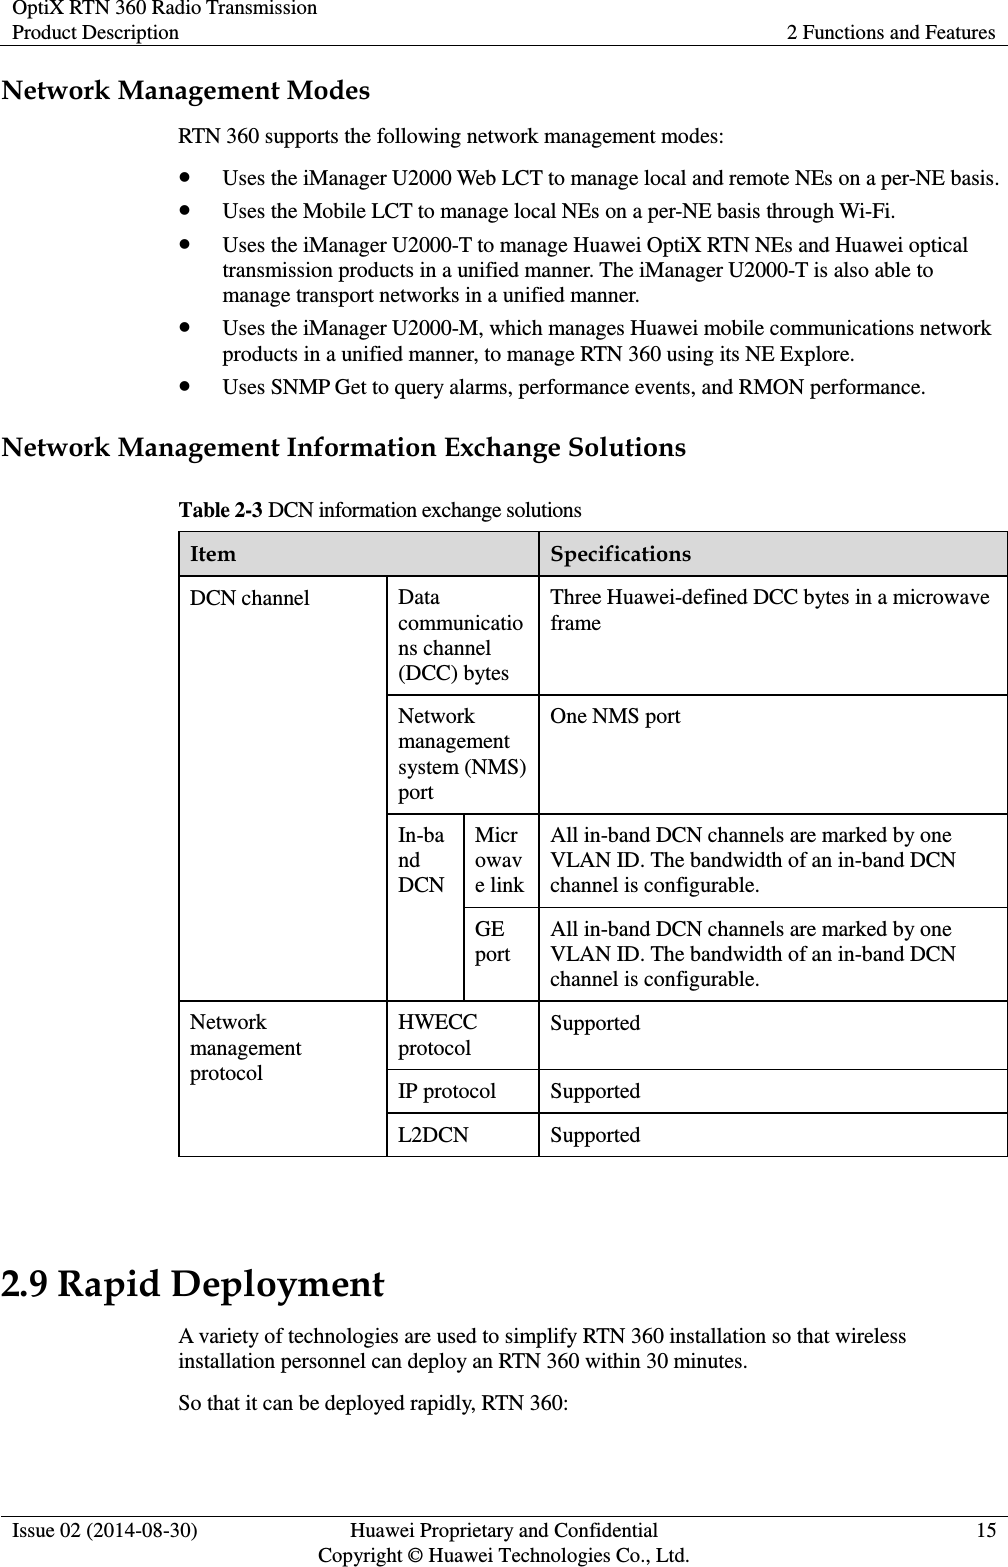 OptiX RTN 360 Radio Transmission Product Description 2 Functions and Features  Issue 02 (2014-08-30) Huawei Proprietary and Confidential                                     Copyright © Huawei Technologies Co., Ltd. 15  Network Management Modes RTN 360 supports the following network management modes:  Uses the iManager U2000 Web LCT to manage local and remote NEs on a per-NE basis.  Uses the Mobile LCT to manage local NEs on a per-NE basis through Wi-Fi.  Uses the iManager U2000-T to manage Huawei OptiX RTN NEs and Huawei optical transmission products in a unified manner. The iManager U2000-T is also able to manage transport networks in a unified manner.    Uses the iManager U2000-M, which manages Huawei mobile communications network products in a unified manner, to manage RTN 360 using its NE Explore.  Uses SNMP Get to query alarms, performance events, and RMON performance. Network Management Information Exchange Solutions Table 2-3 DCN information exchange solutions Item Specifications DCN channel Data communications channel (DCC) bytes Three Huawei-defined DCC bytes in a microwave frame Network management system (NMS) port One NMS port In-band DCN Microwave link All in-band DCN channels are marked by one VLAN ID. The bandwidth of an in-band DCN channel is configurable. GE port All in-band DCN channels are marked by one VLAN ID. The bandwidth of an in-band DCN channel is configurable. Network management protocol HWECC protocol Supported IP protocol Supported L2DCN Supported  2.9 Rapid Deployment A variety of technologies are used to simplify RTN 360 installation so that wireless installation personnel can deploy an RTN 360 within 30 minutes. So that it can be deployed rapidly, RTN 360: 